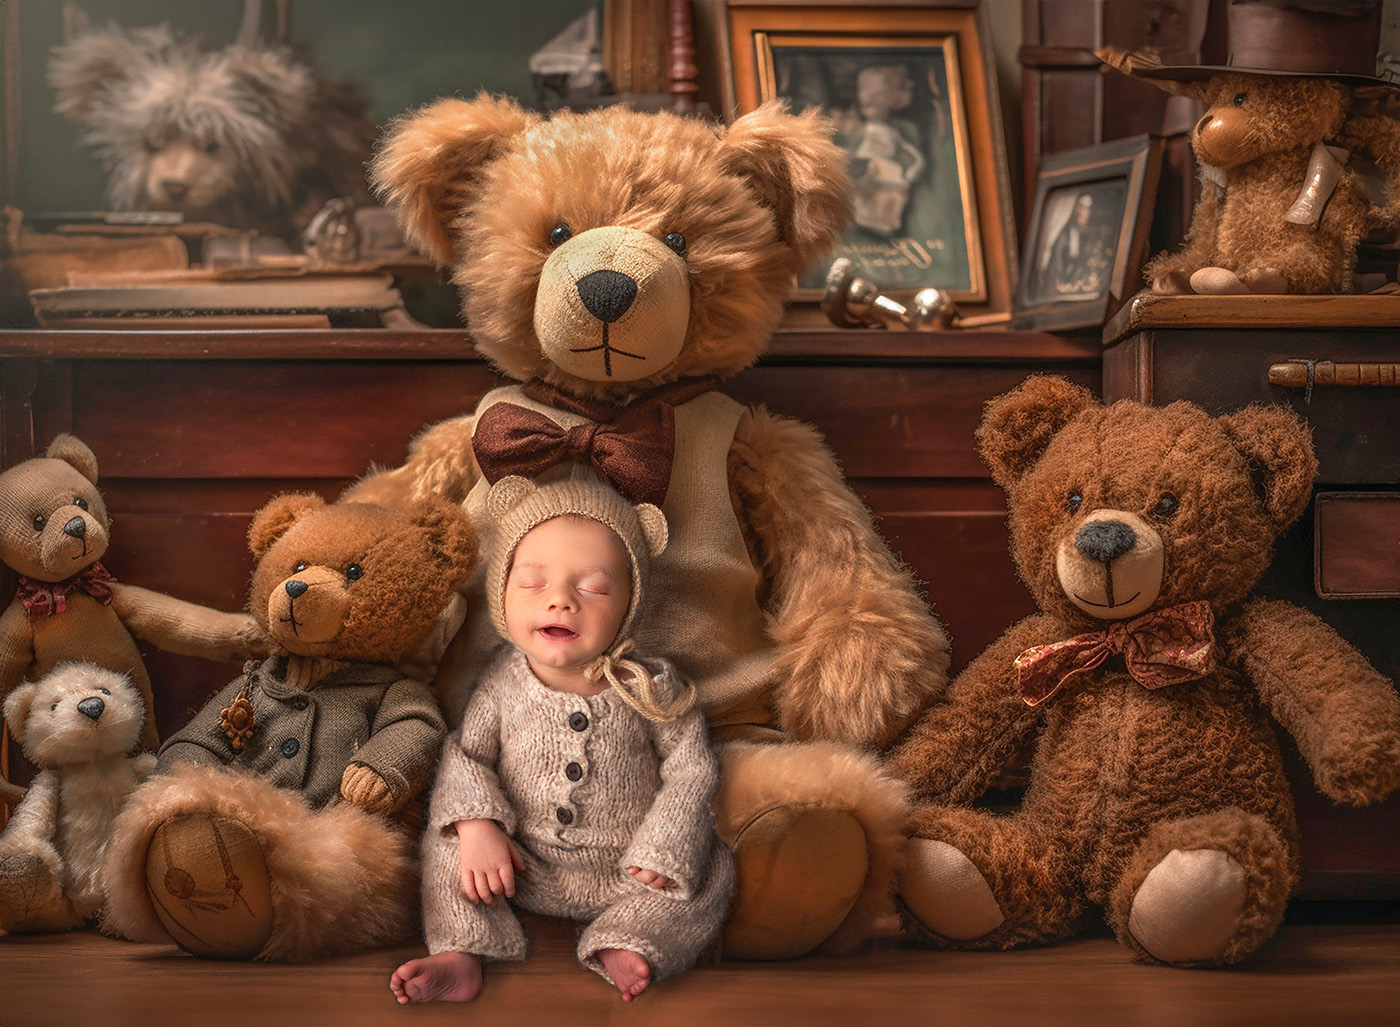 why is my newborn so fussy how to calm a fussy baby tips and tricks for soothing a crying newborn how to calm a very fussy newborn baby baby dressed as teddy bear sitting in teddy bear closet